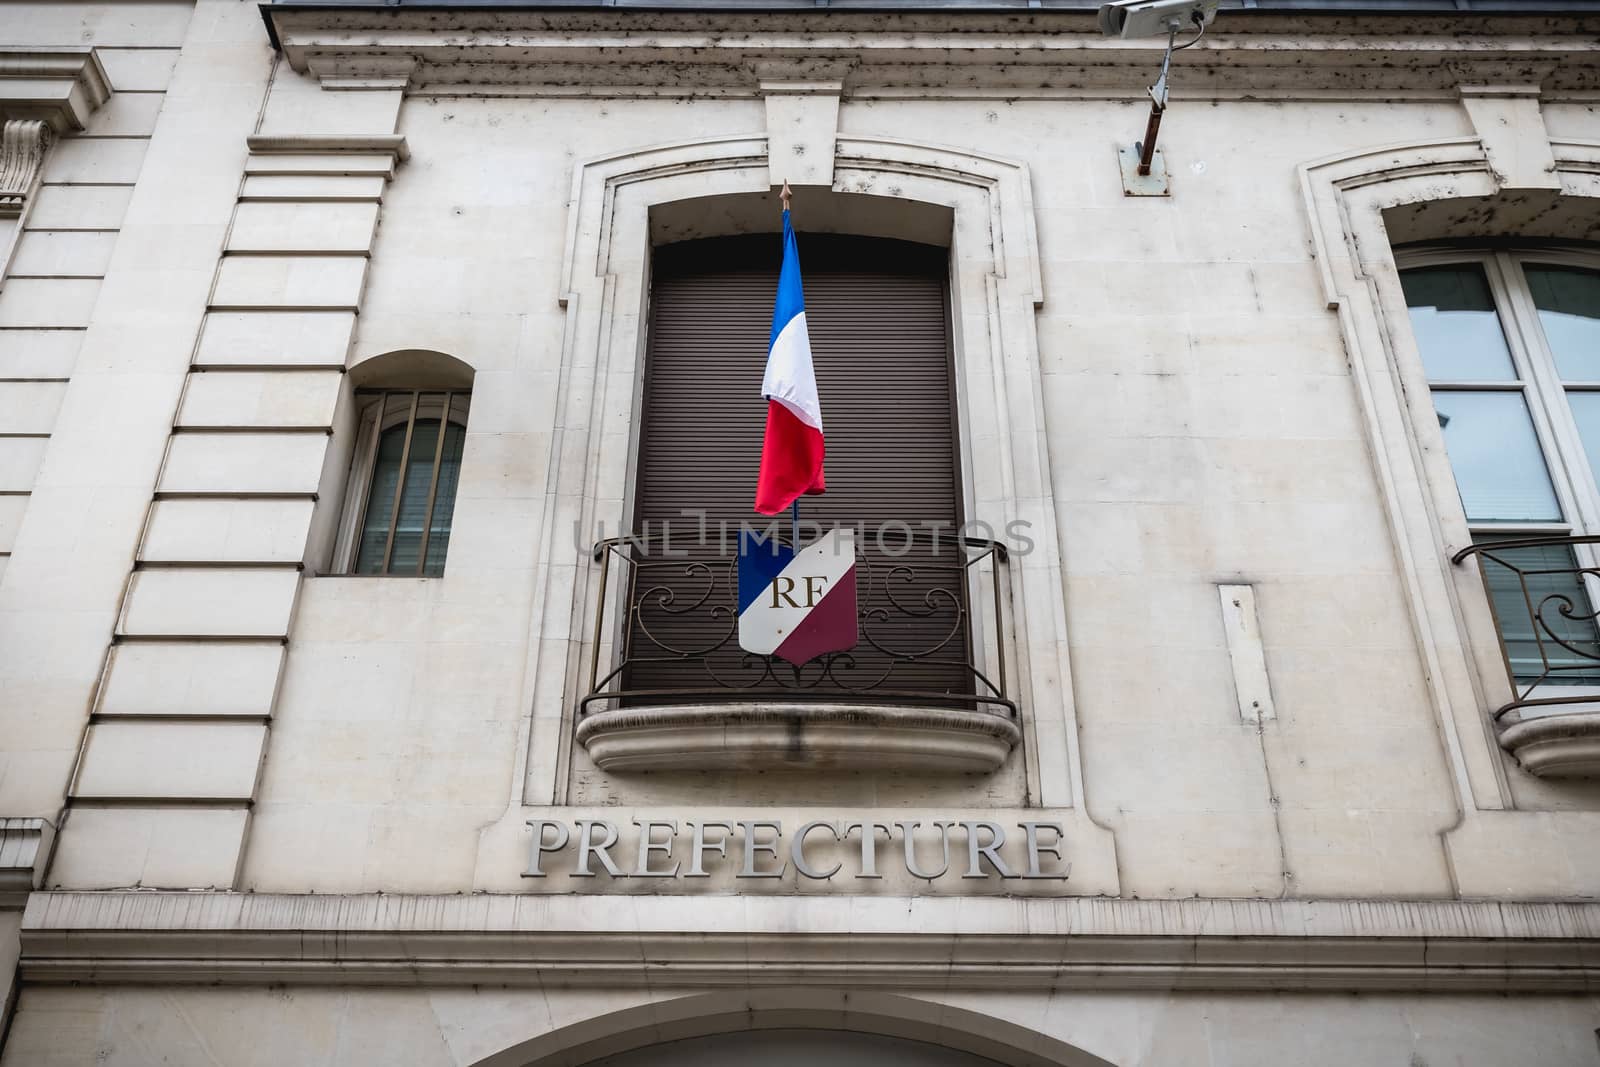 architectural detail of the prefecture of Indre et Loire in Tour by AtlanticEUROSTOXX